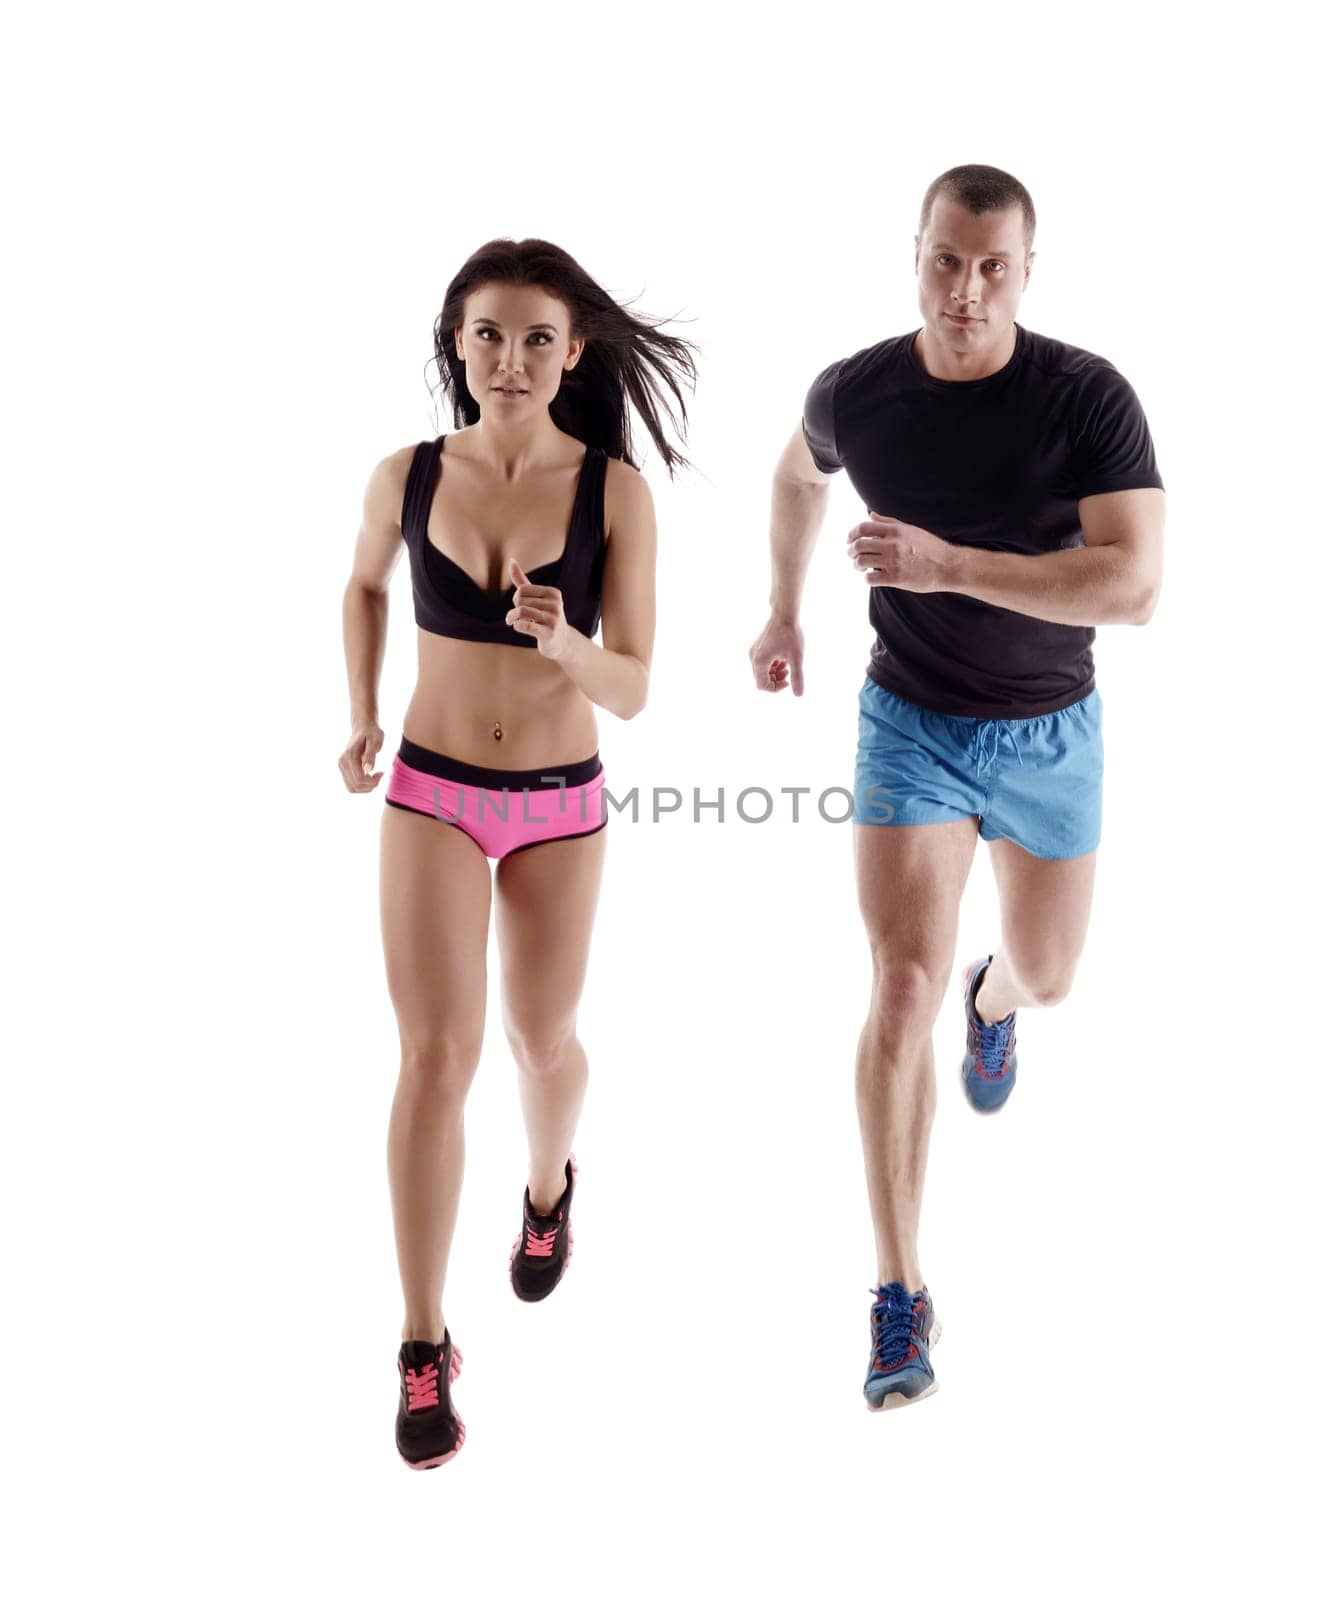 Studio photo of handsome runners posing at camera, isolated on white